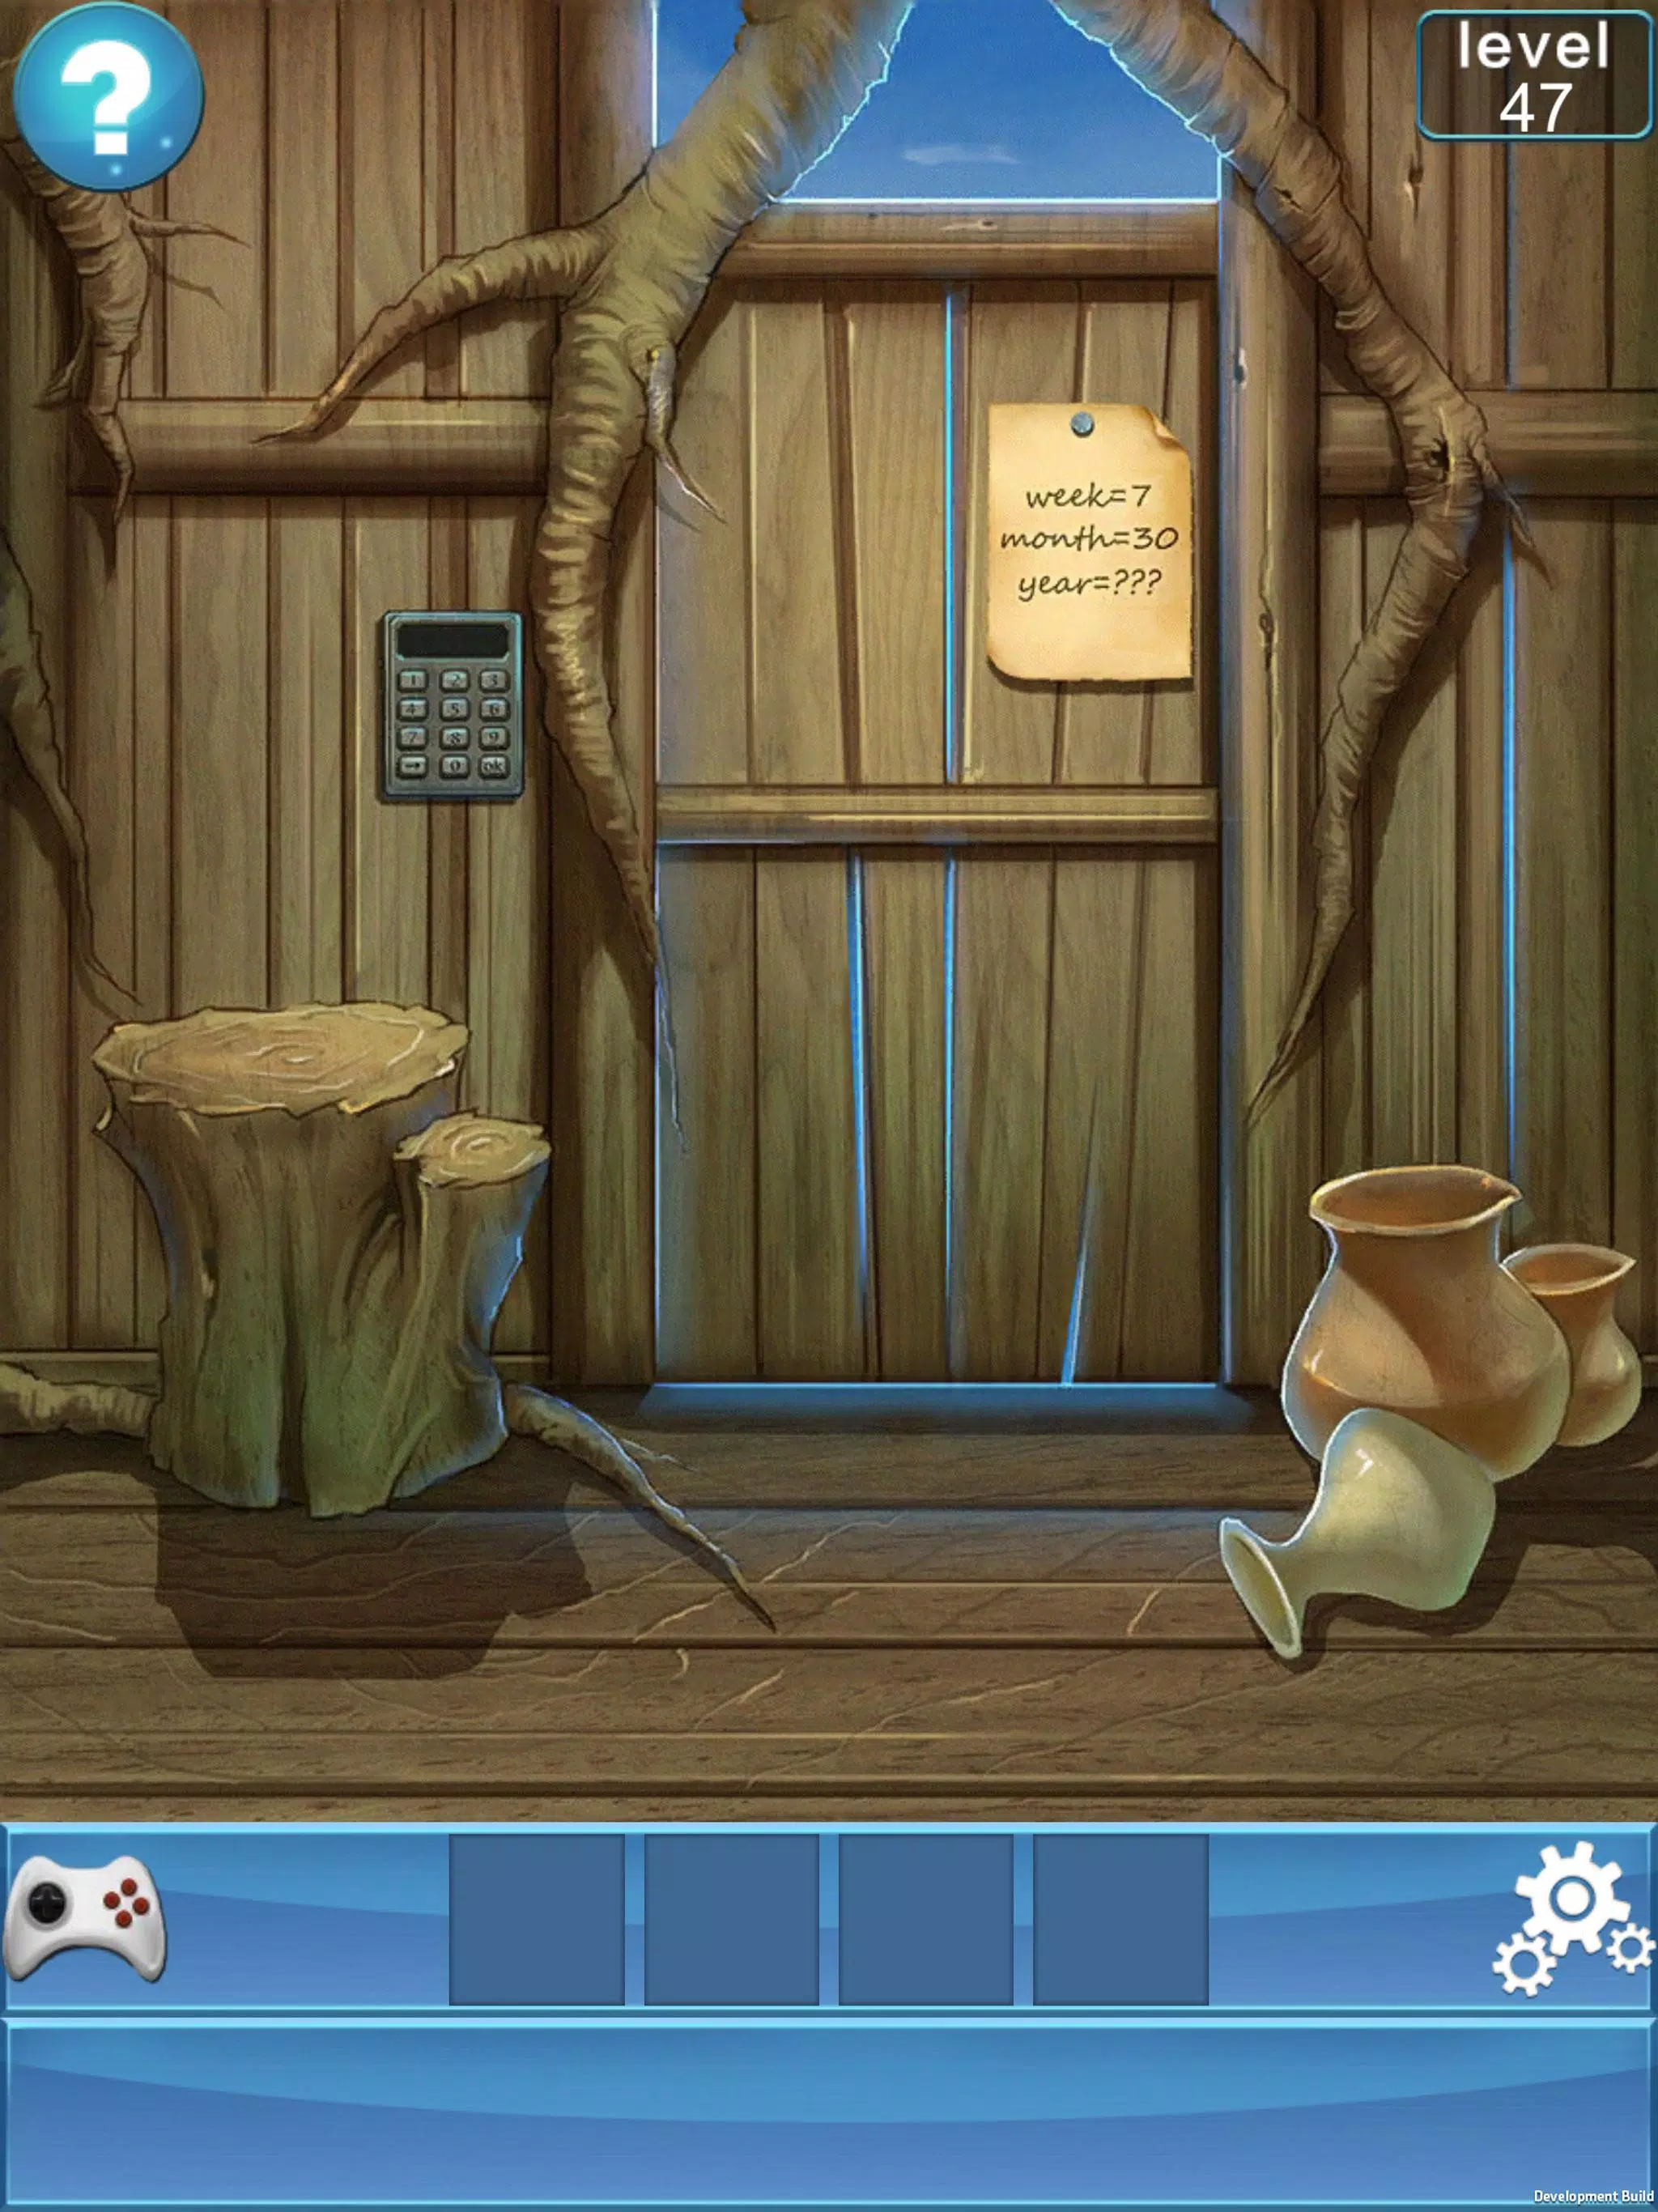 100 Doors Puzzle Challenge 2 - Escape games for Android - APK Download